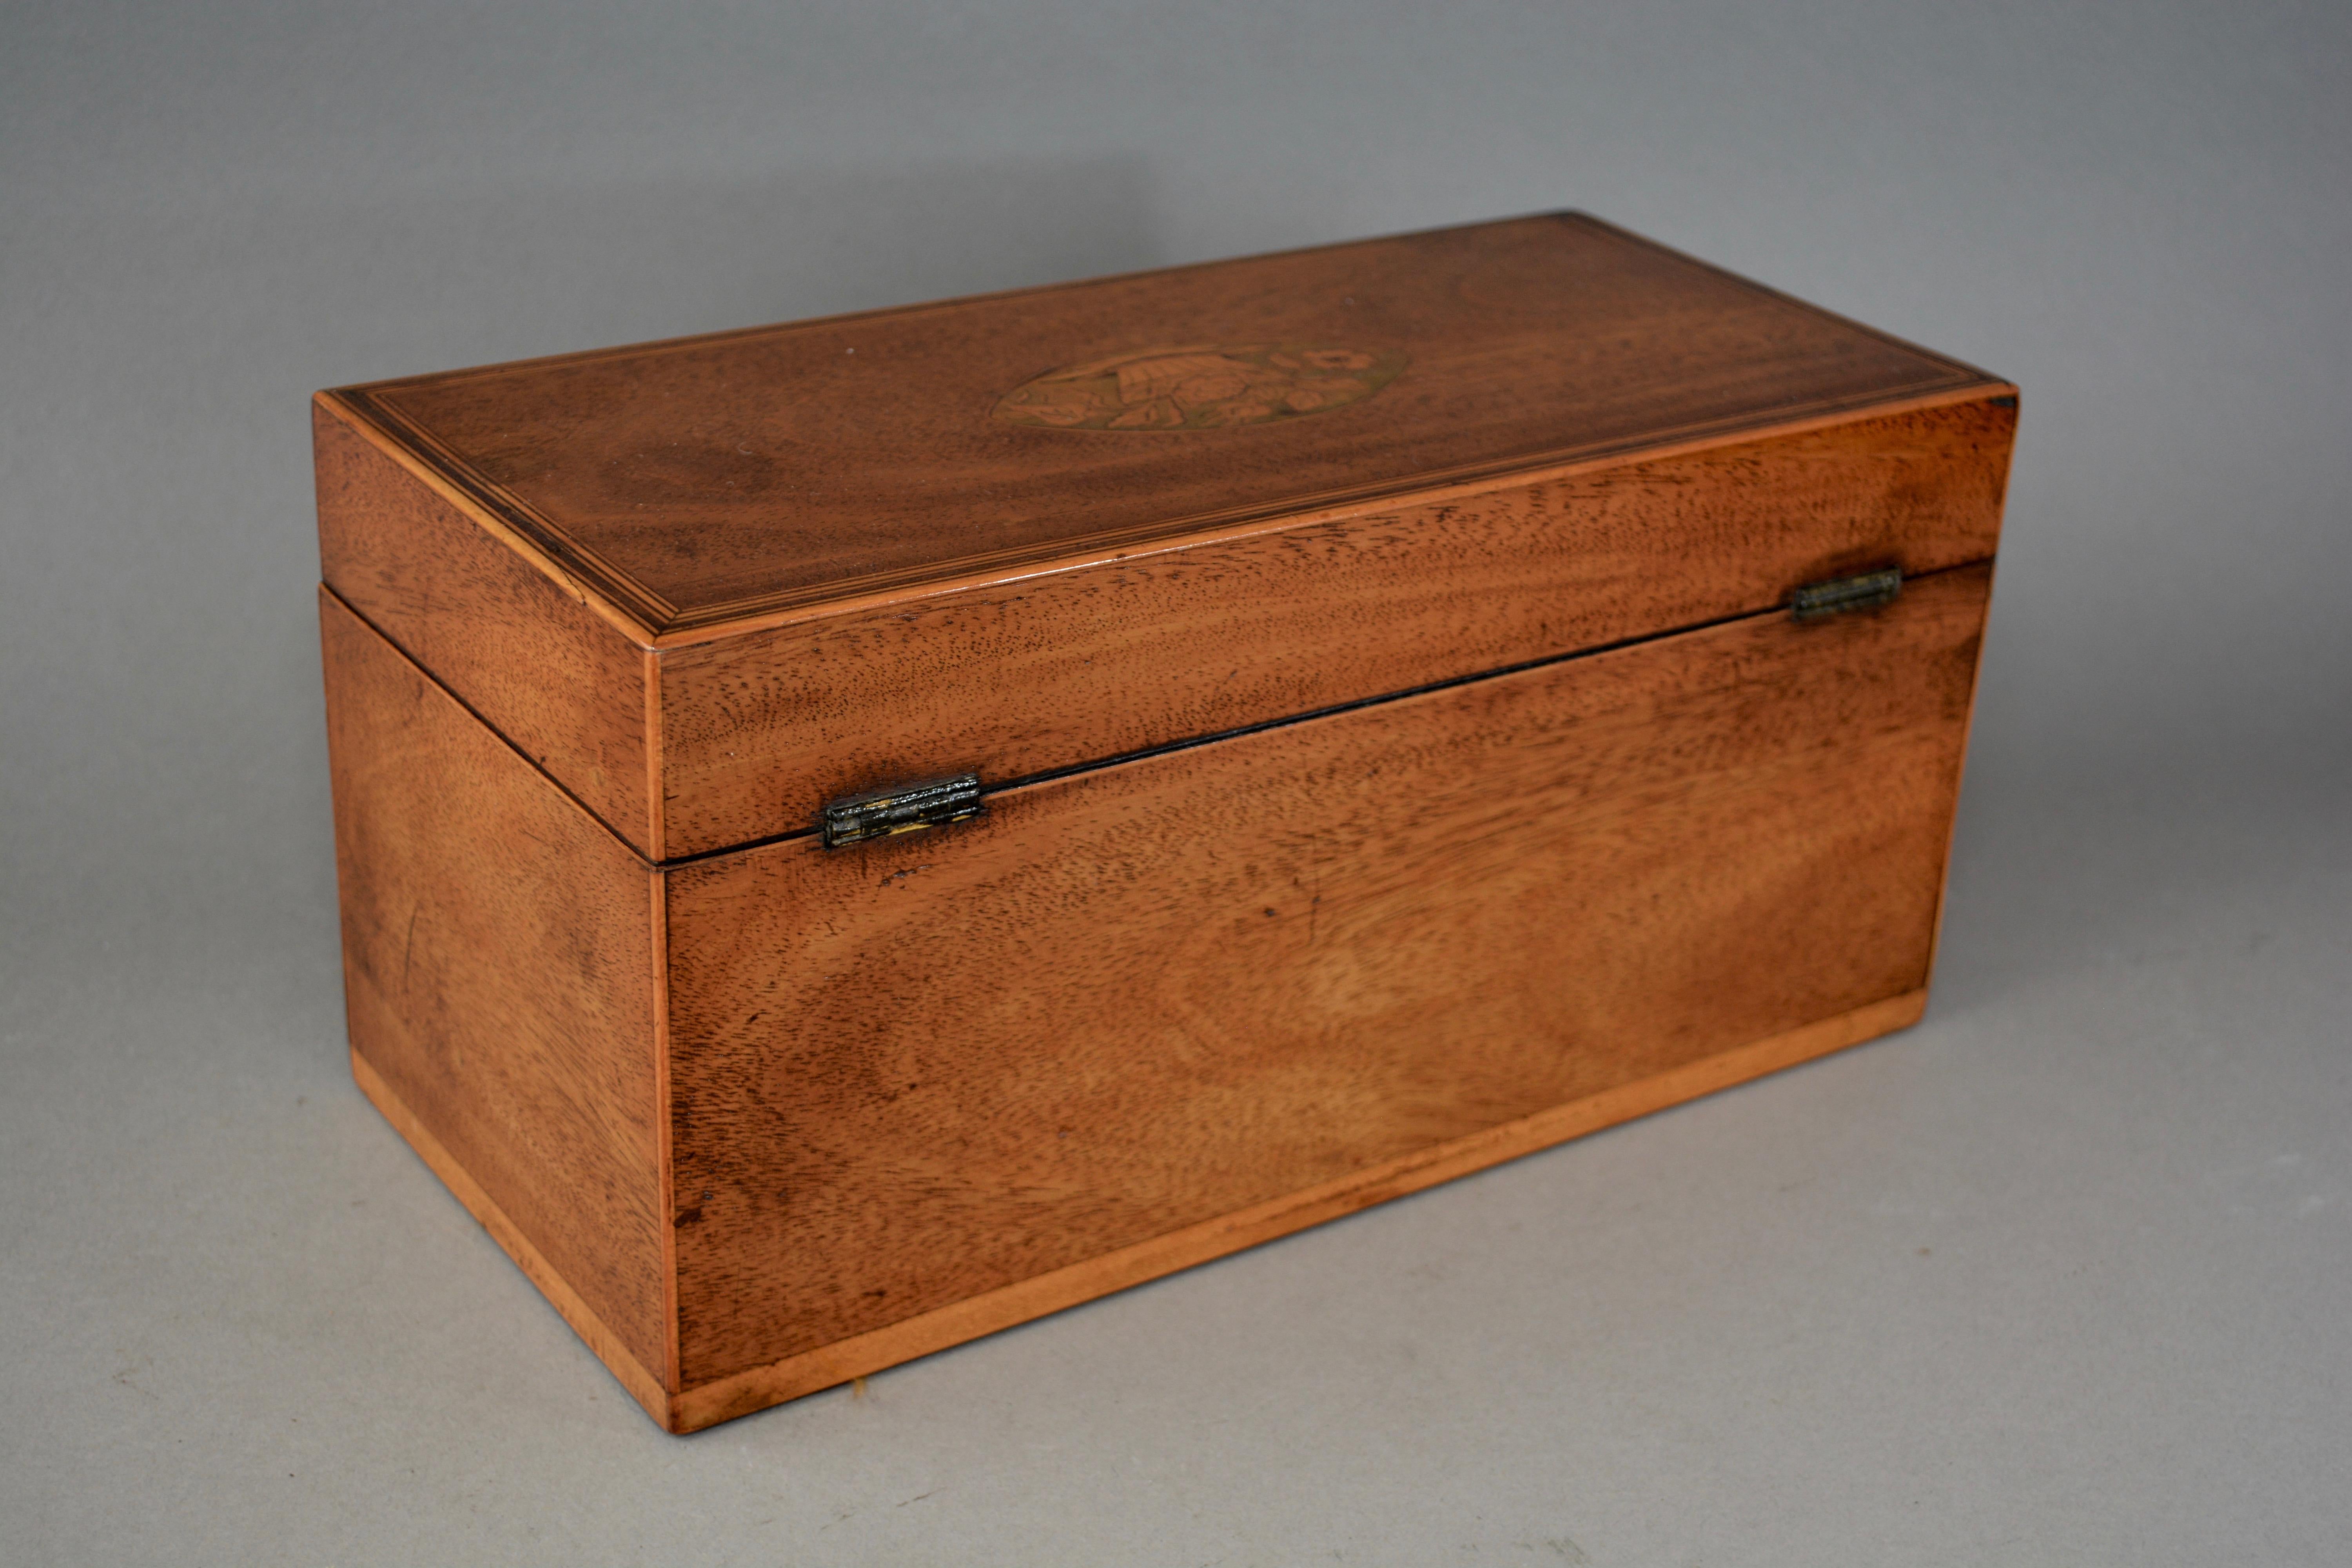 Early 19th Century George III Mahogany Tea Caddy with Inlaid Shell and Flower Motifs C180